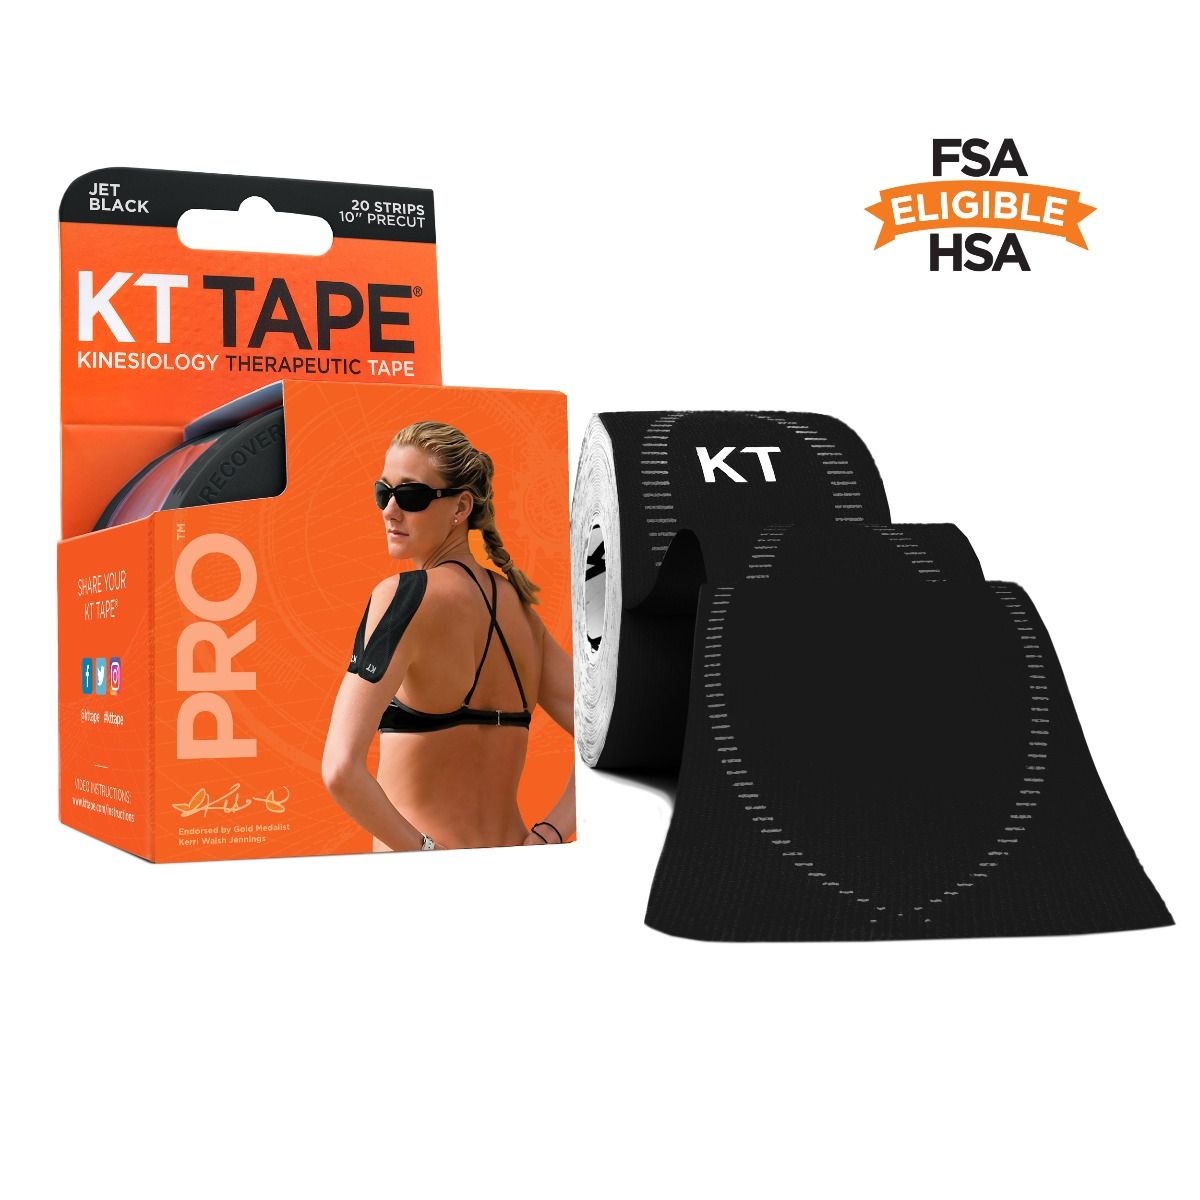 Image of the KT Tape Pro and it's packaging in the color Black